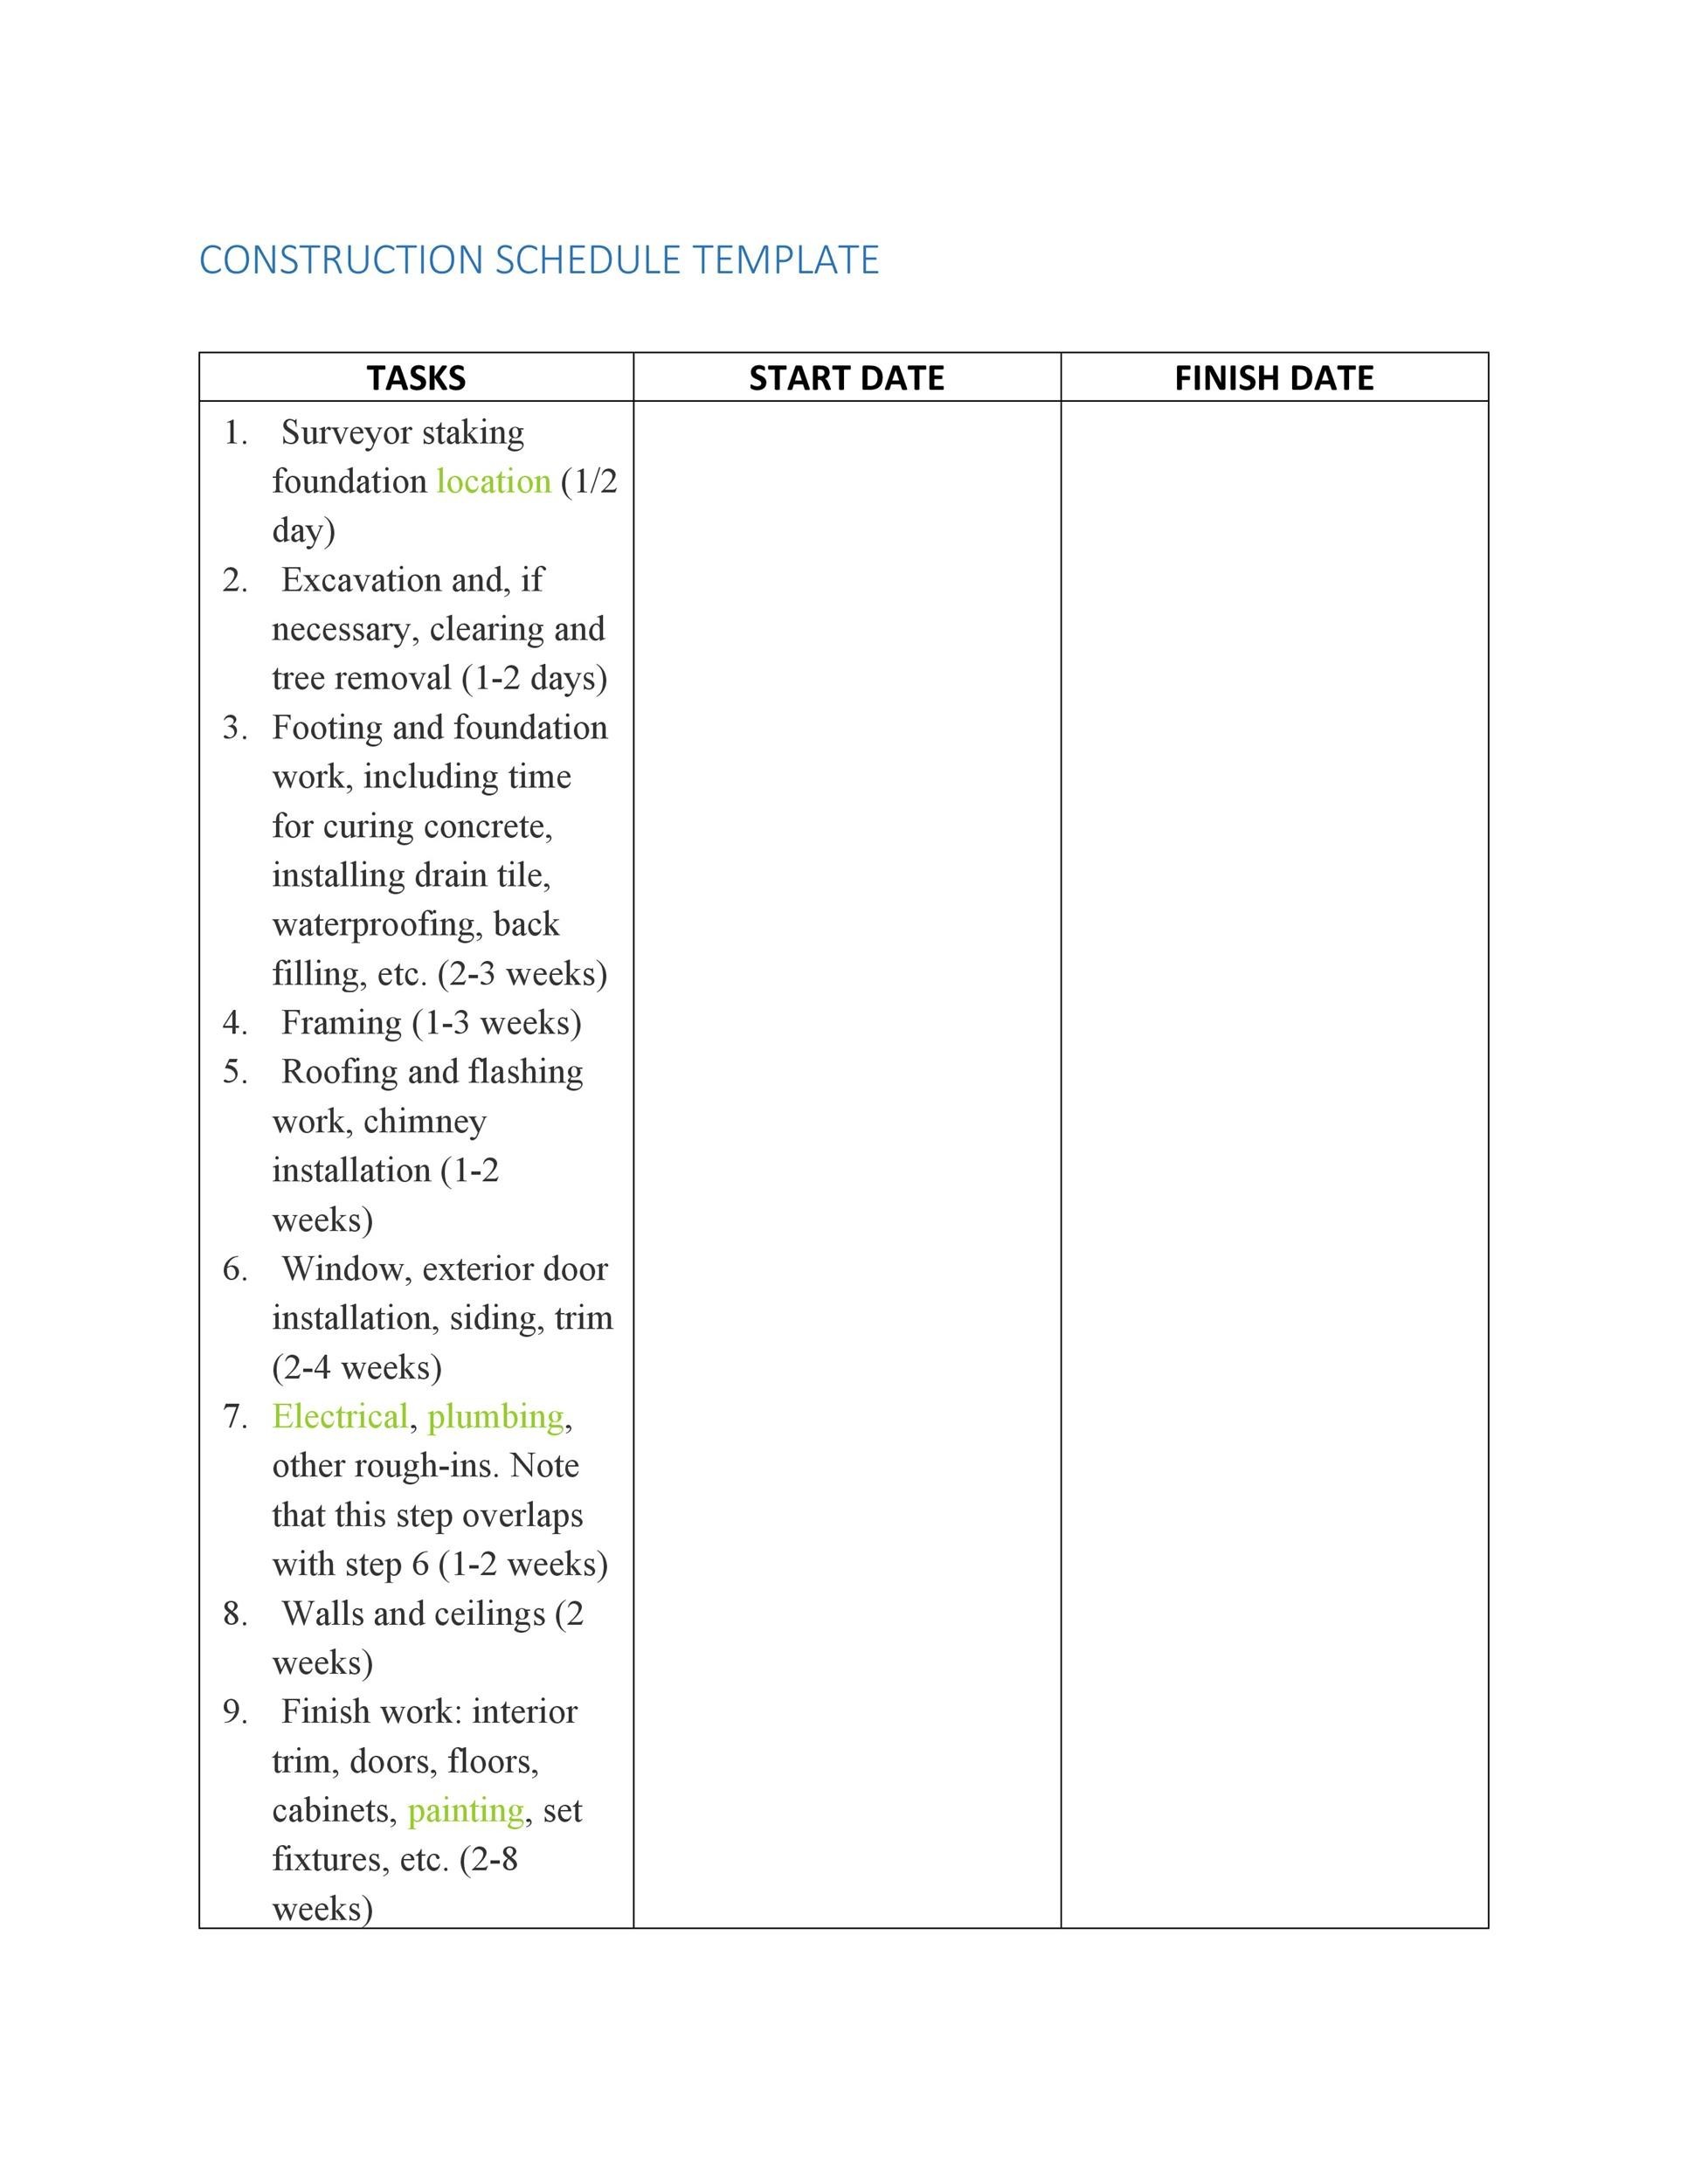 Free construction schedule template 03